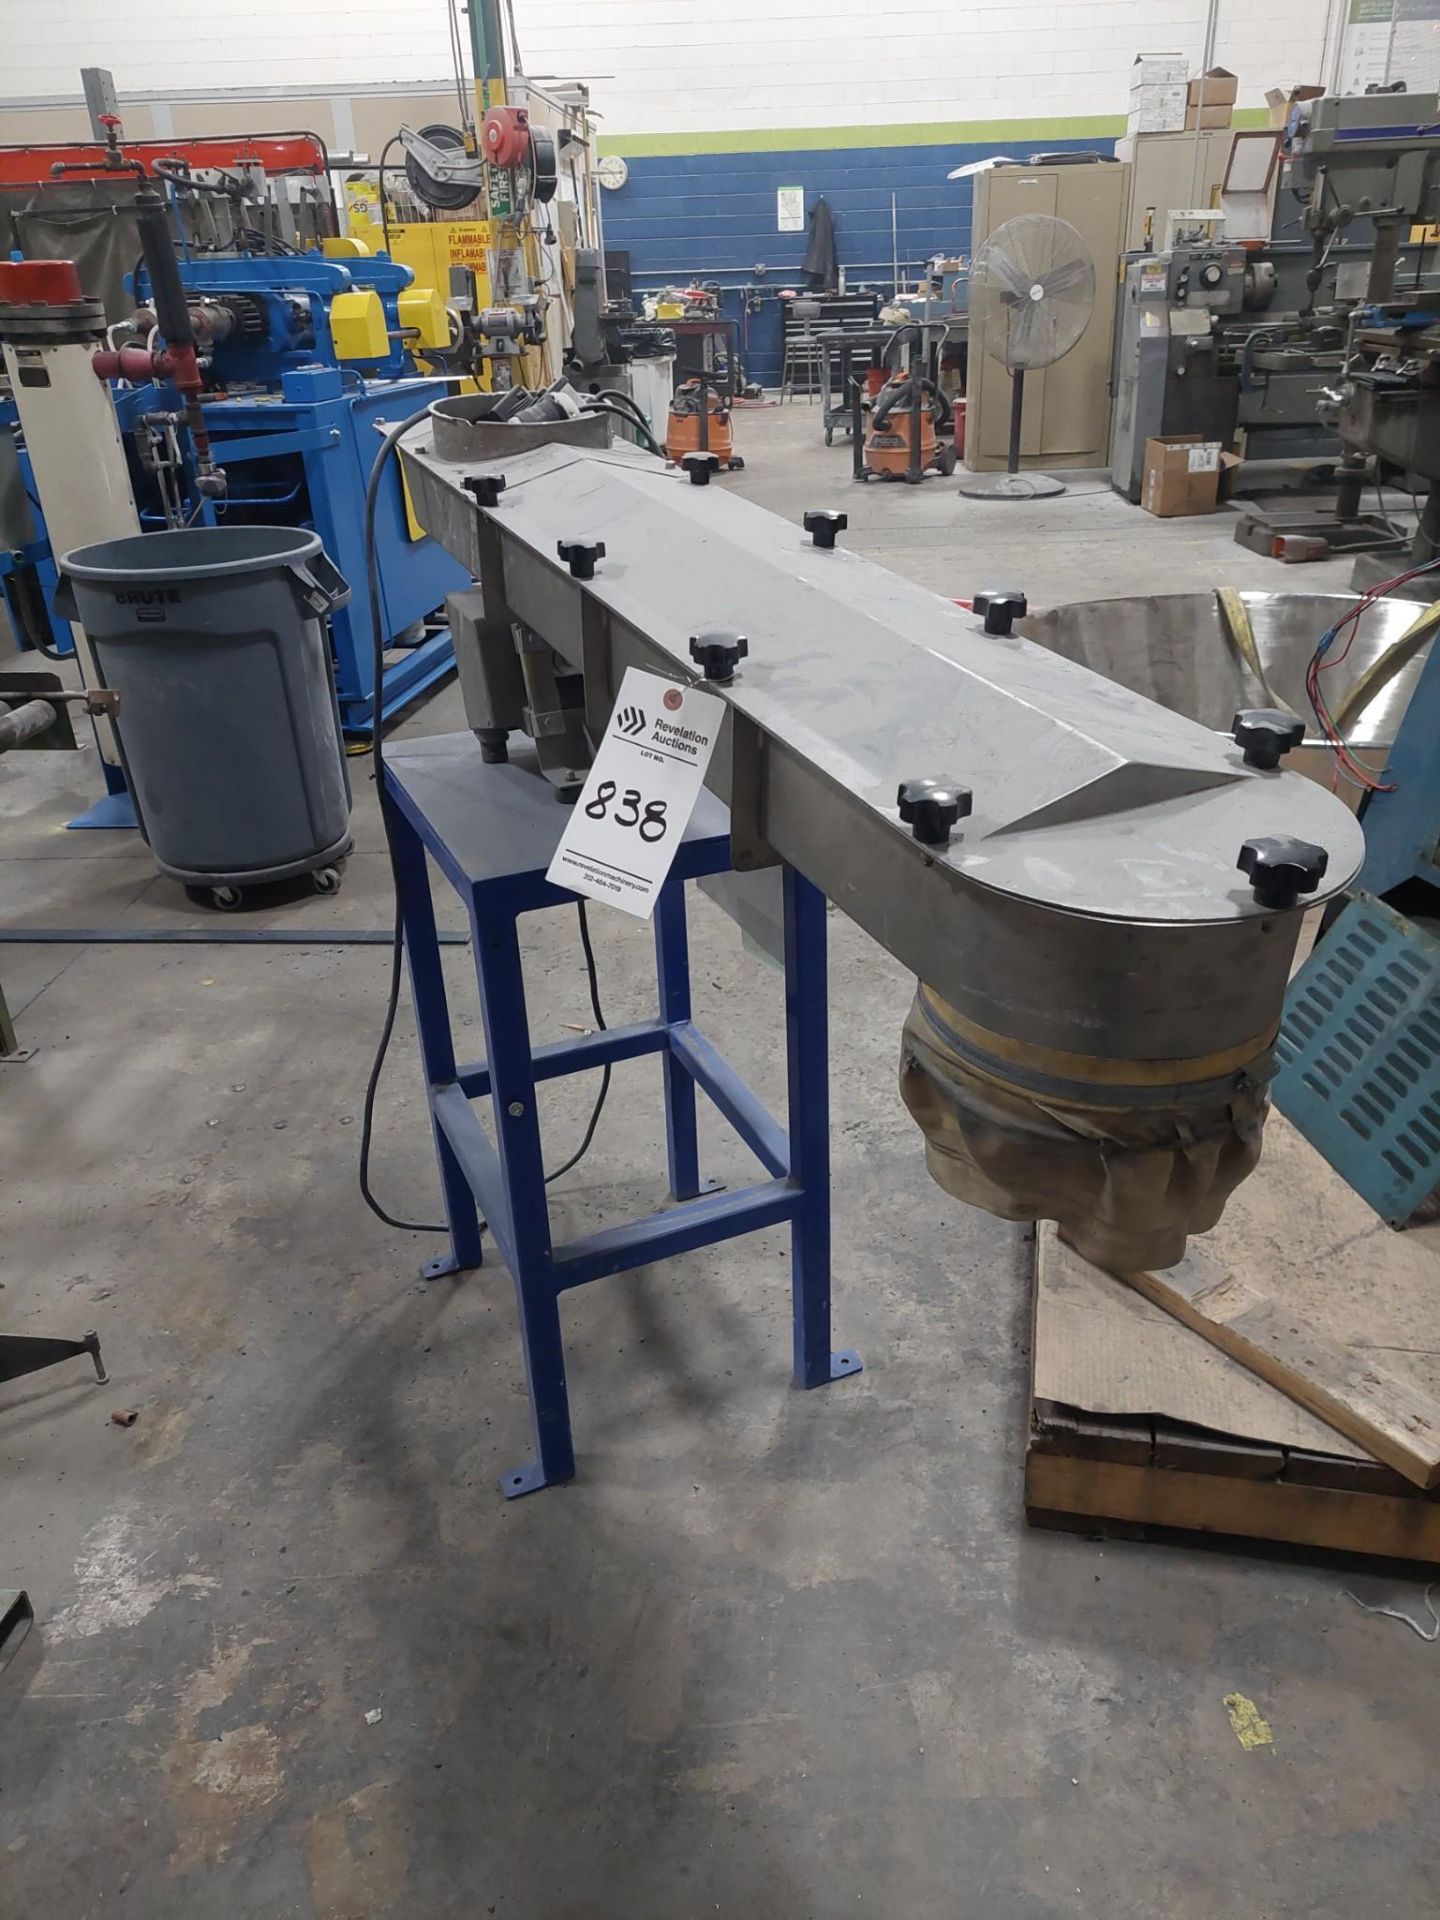 GOUGH ENGINEERING 8" X 48" VIBRATORY FEEDER STAINLESS STEEL ON STAND 8" FEED OPENING.